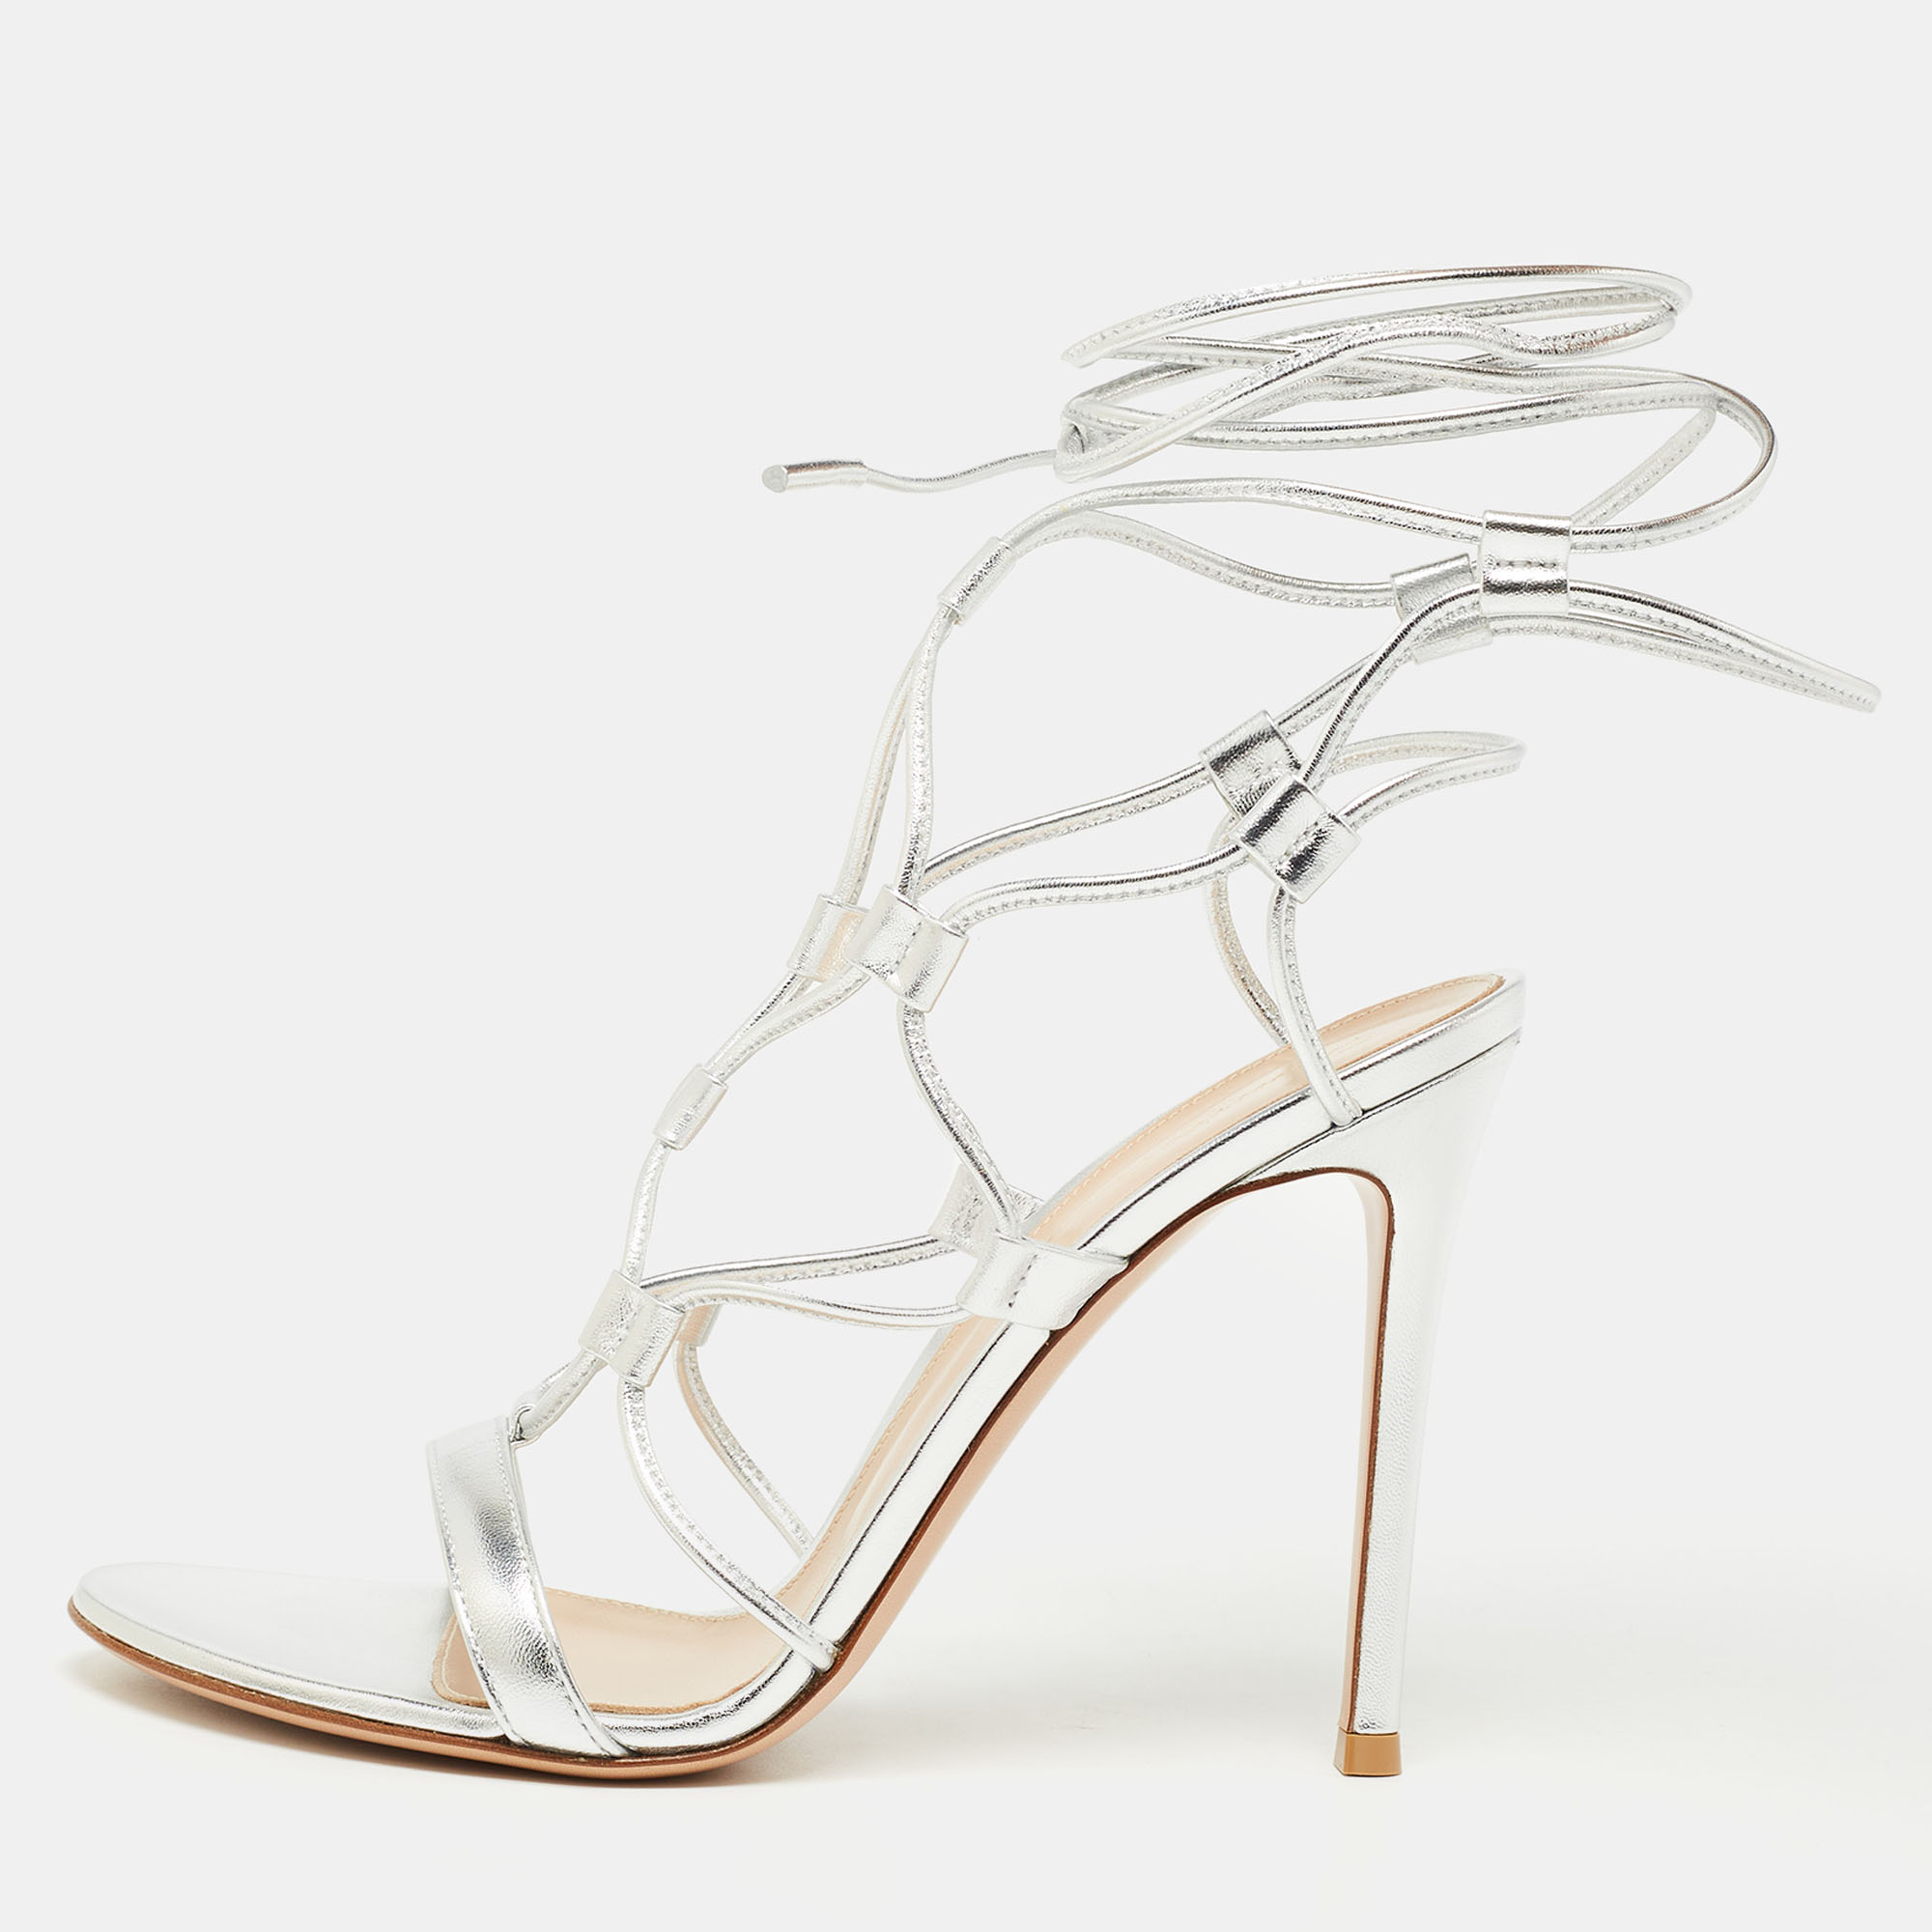 In classy silver leather the Gianvito Rossi Giza sandals exude confident charm. Delicate straps gracefully embrace the foot while a sturdy heel provides stability and style. With impeccable craftsmanship and timeless design these sandals effortlessly command attention adding a bold statement to any ensemble